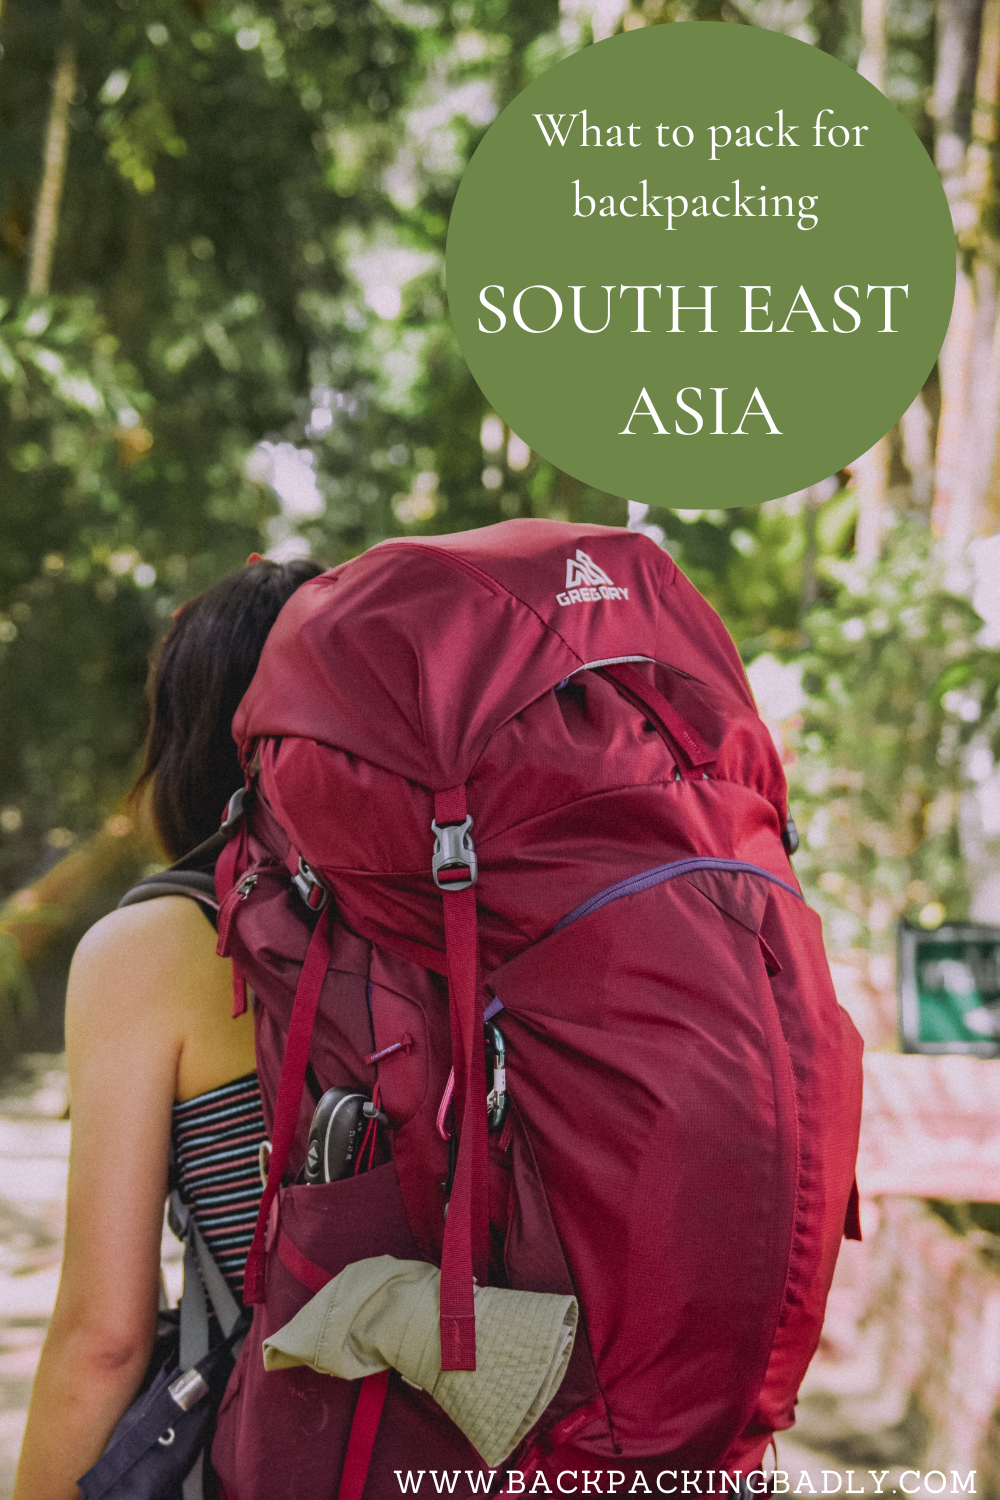 What to pack for your South East Asia backpacking trip